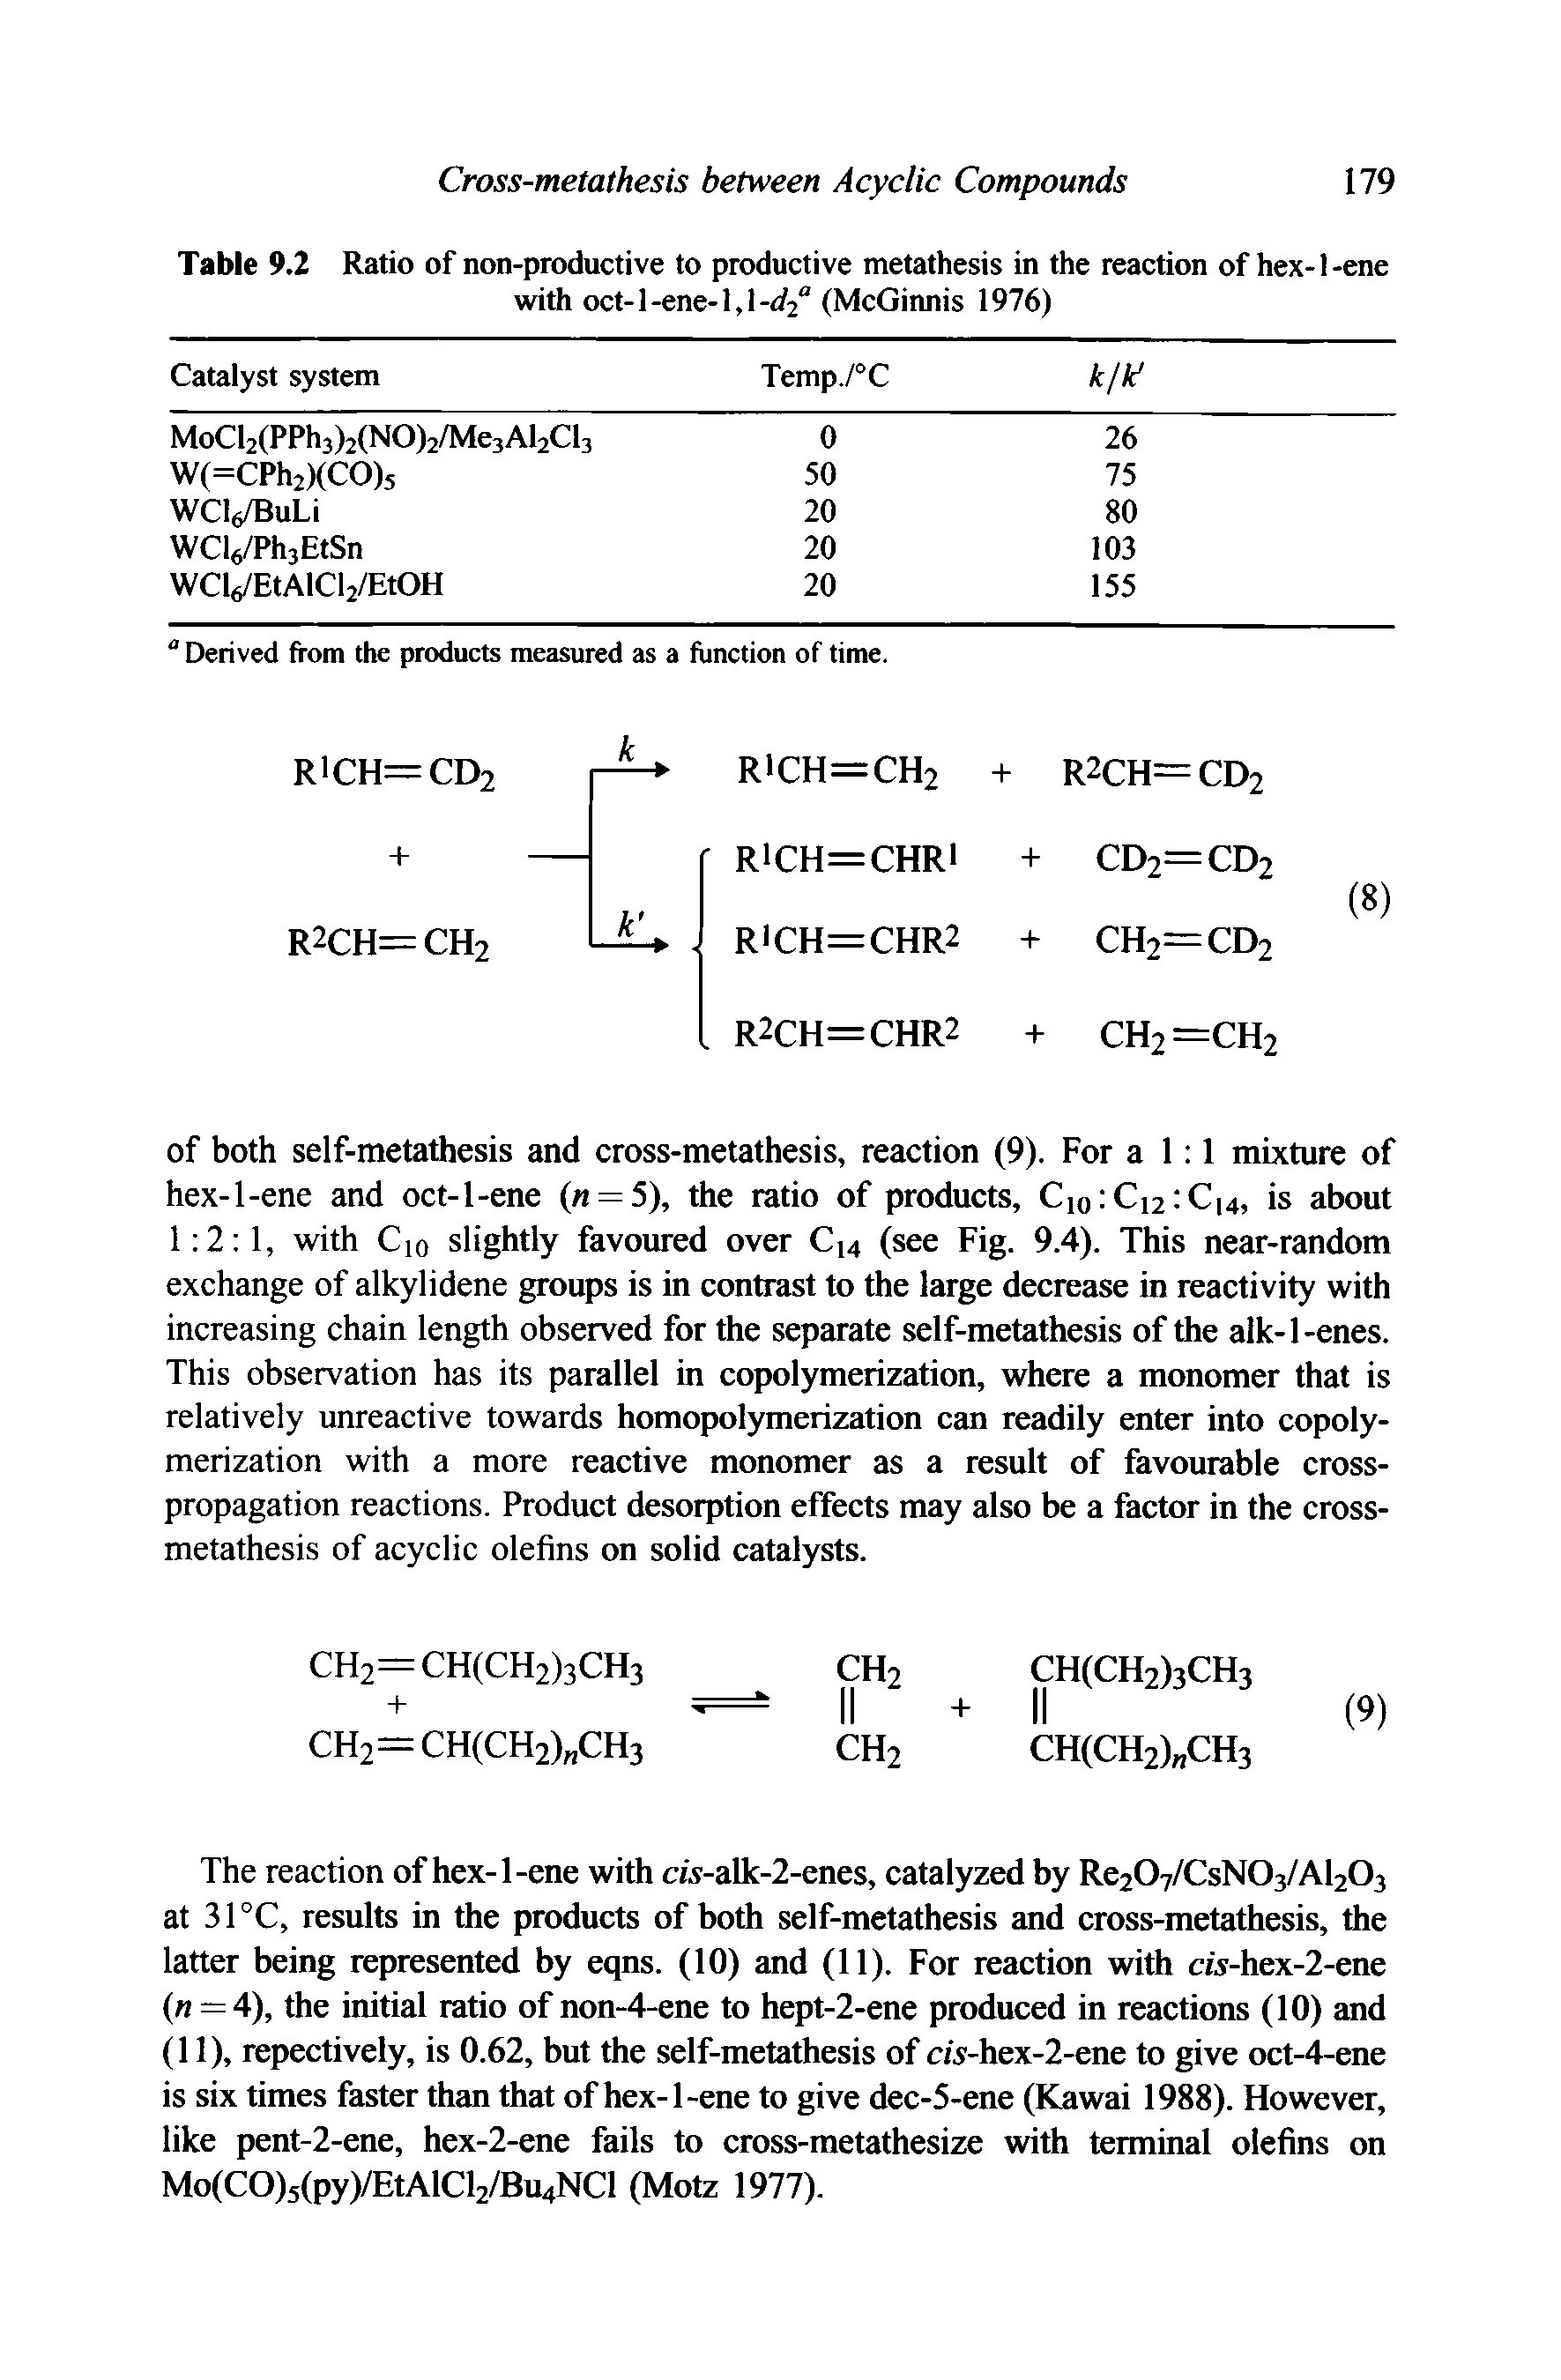 Table 9.2 Ratio of non-productive to productive metathesis in the reaction of hex-l-ene with oct-l-ene-l,l-< 2 (McGinnis 1976)...